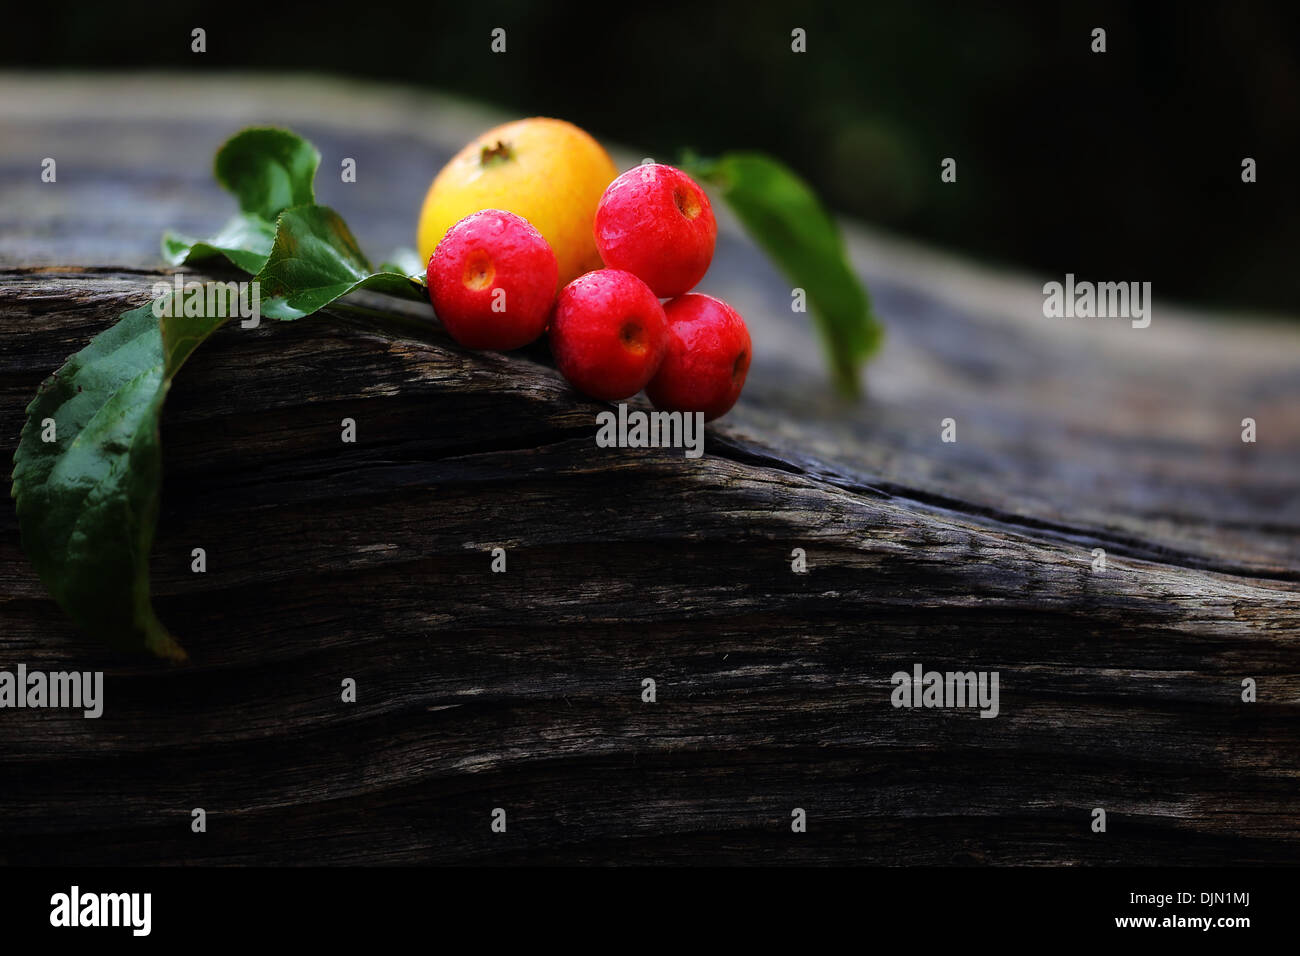 Apples on the wooden bench in the garden in Autumn Stock Photo